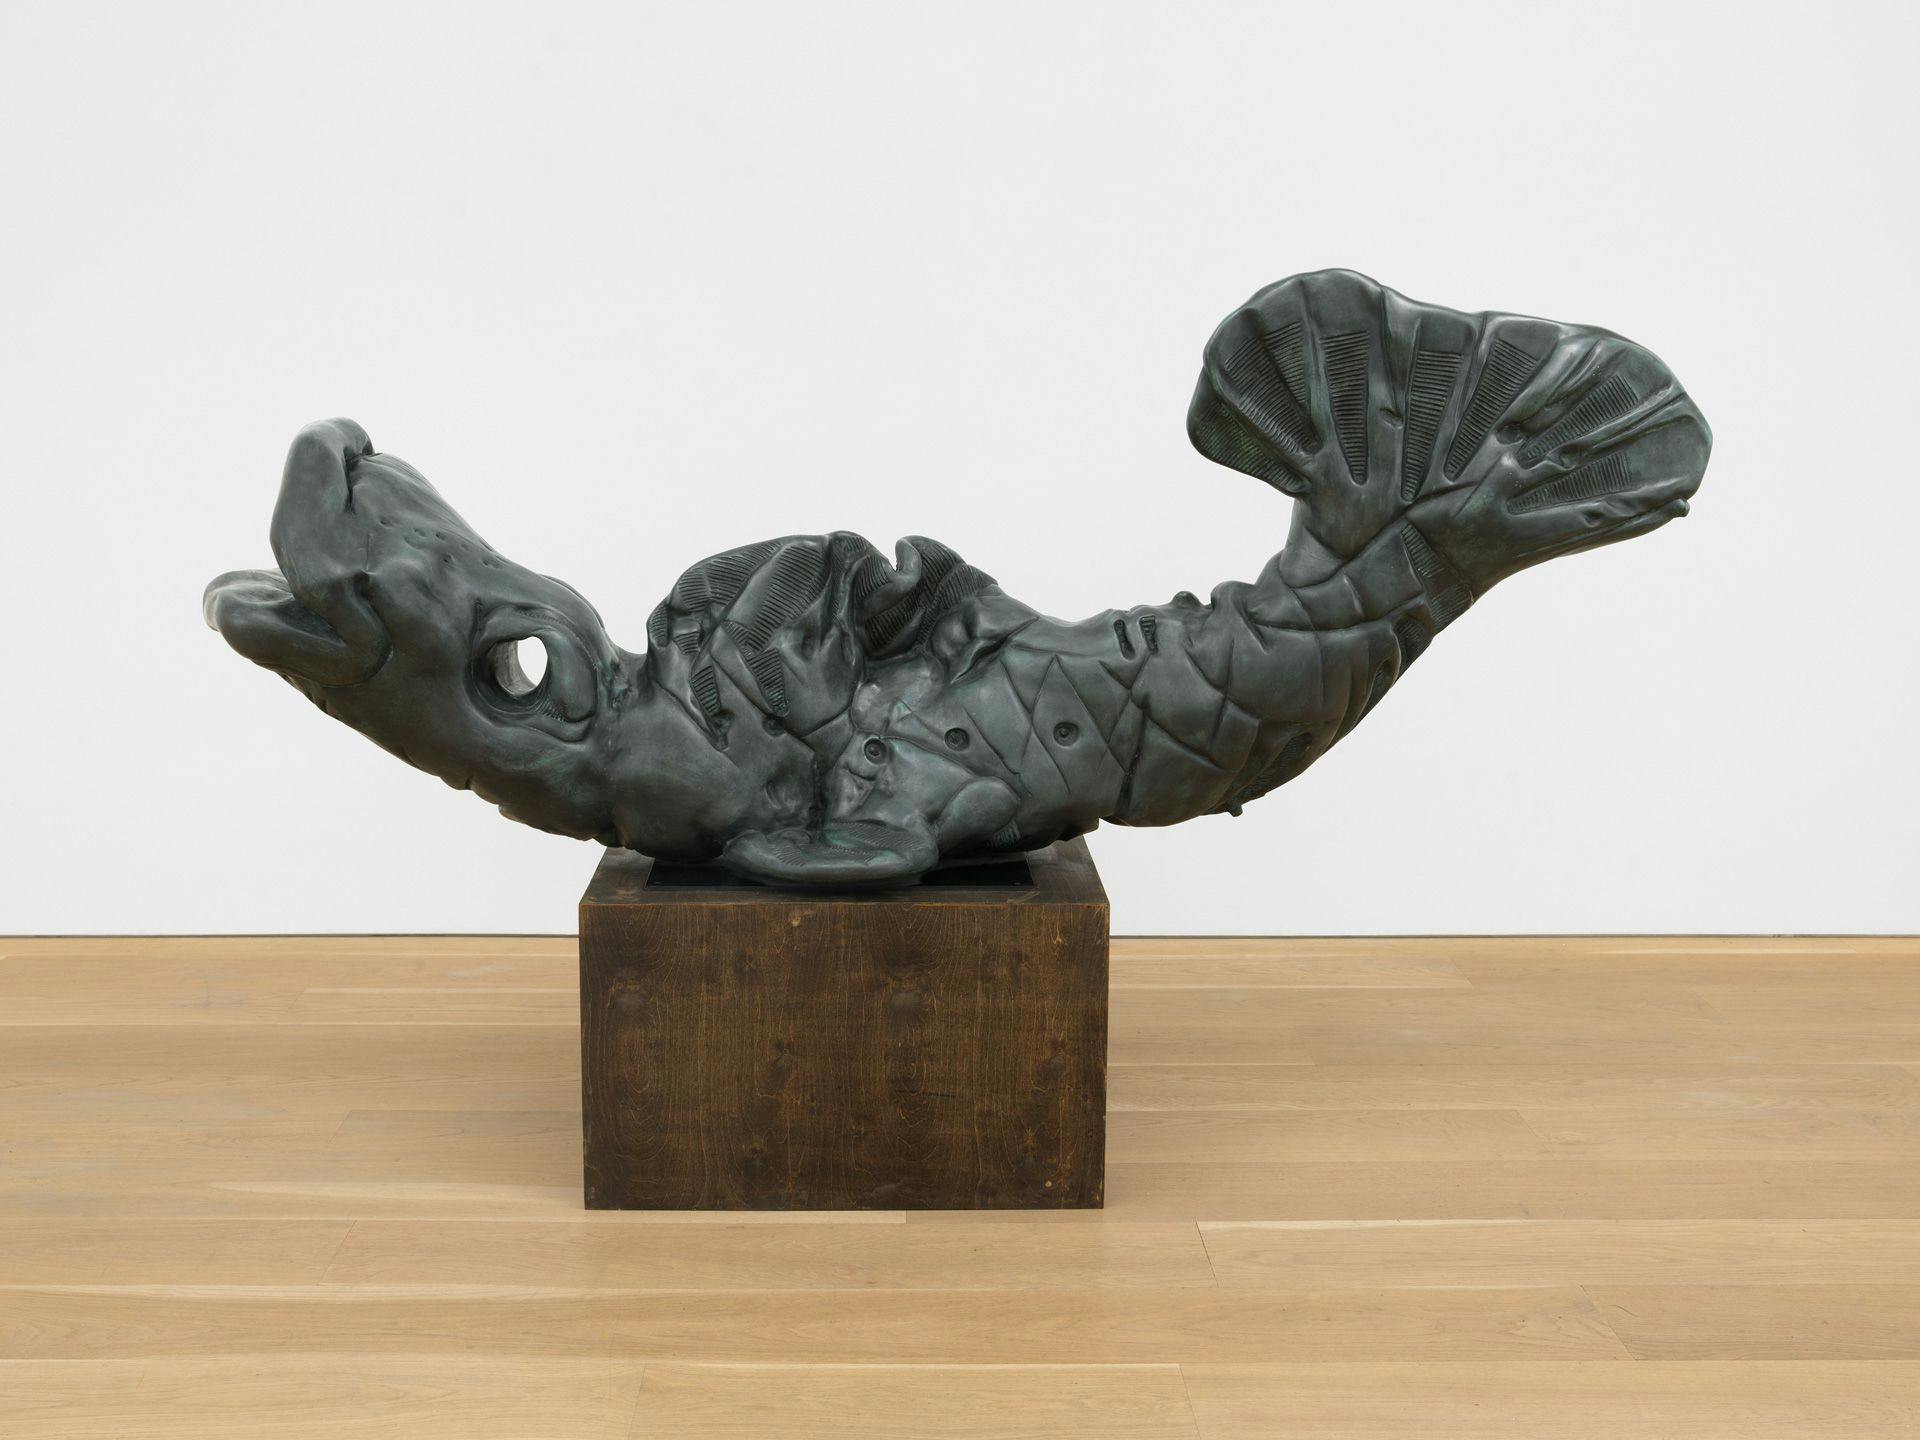 A bronze sculpture by Josh Smith, titled Happy Fish, dated 2011.